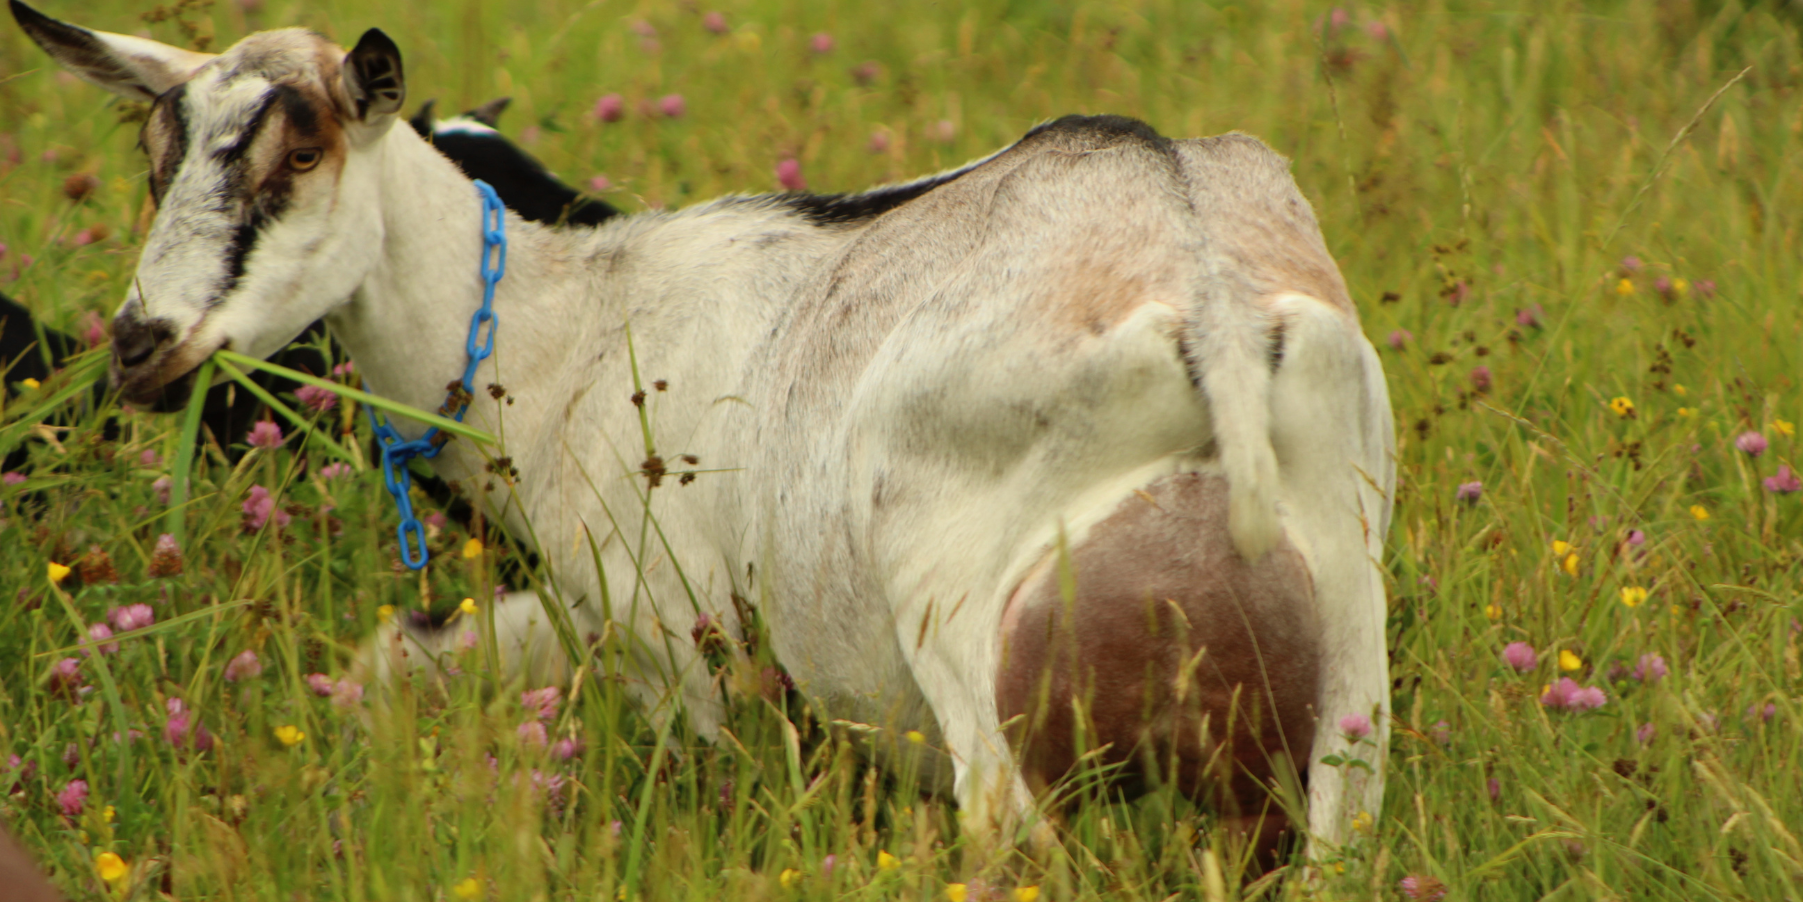 white alpine goat with black ears and black spots in a field of flowers in Somerville, Maine